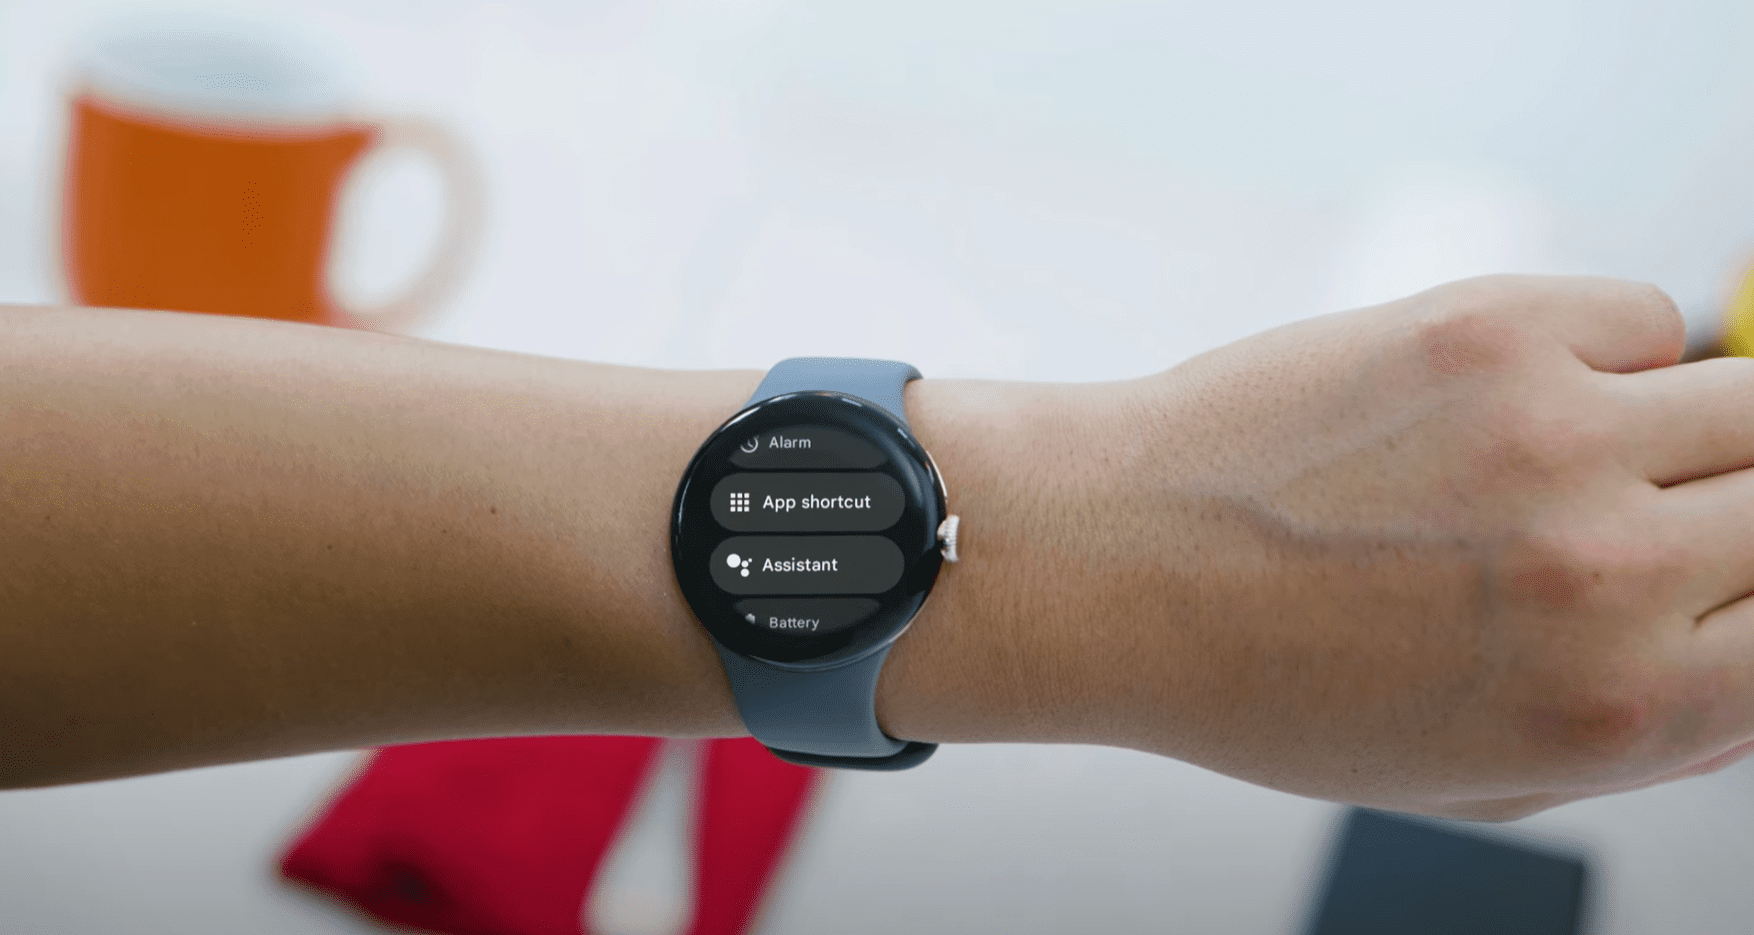 How to use Google Assistant on Pixel Watch - Set up complication